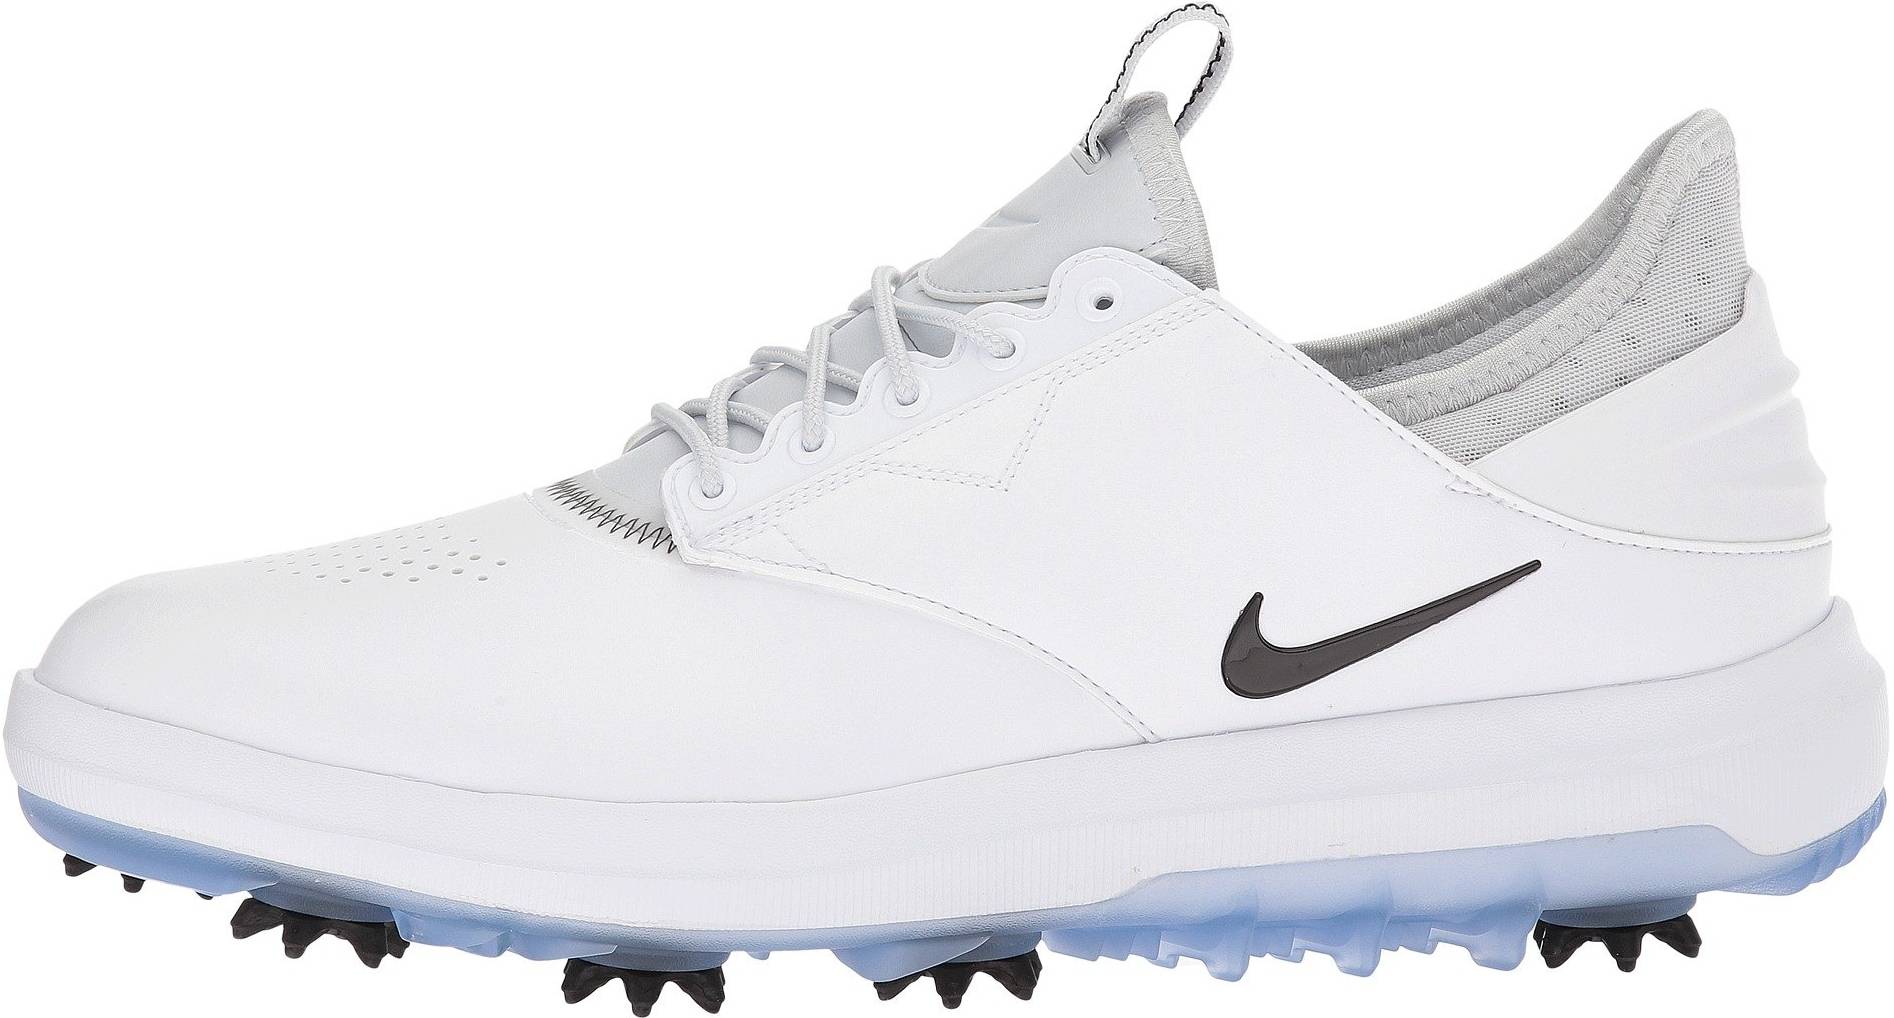 nike golf air zoom direct shoes